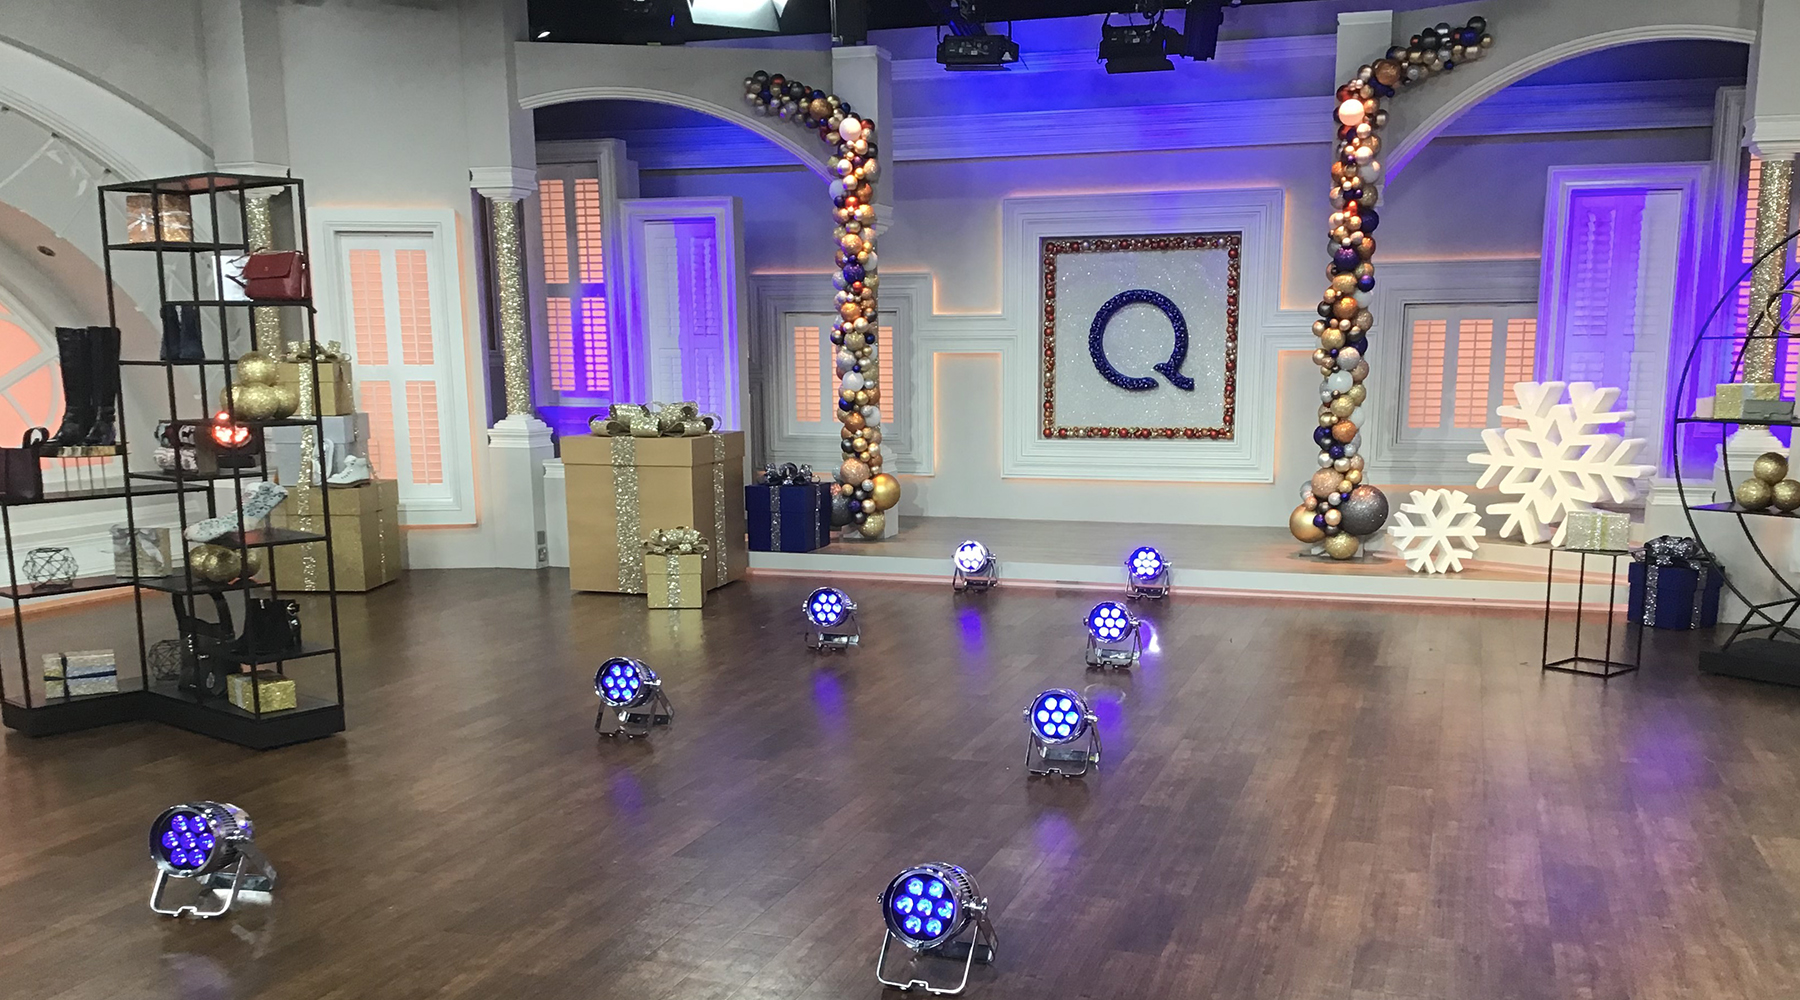 Christmas has arrived here at QVC! Stories